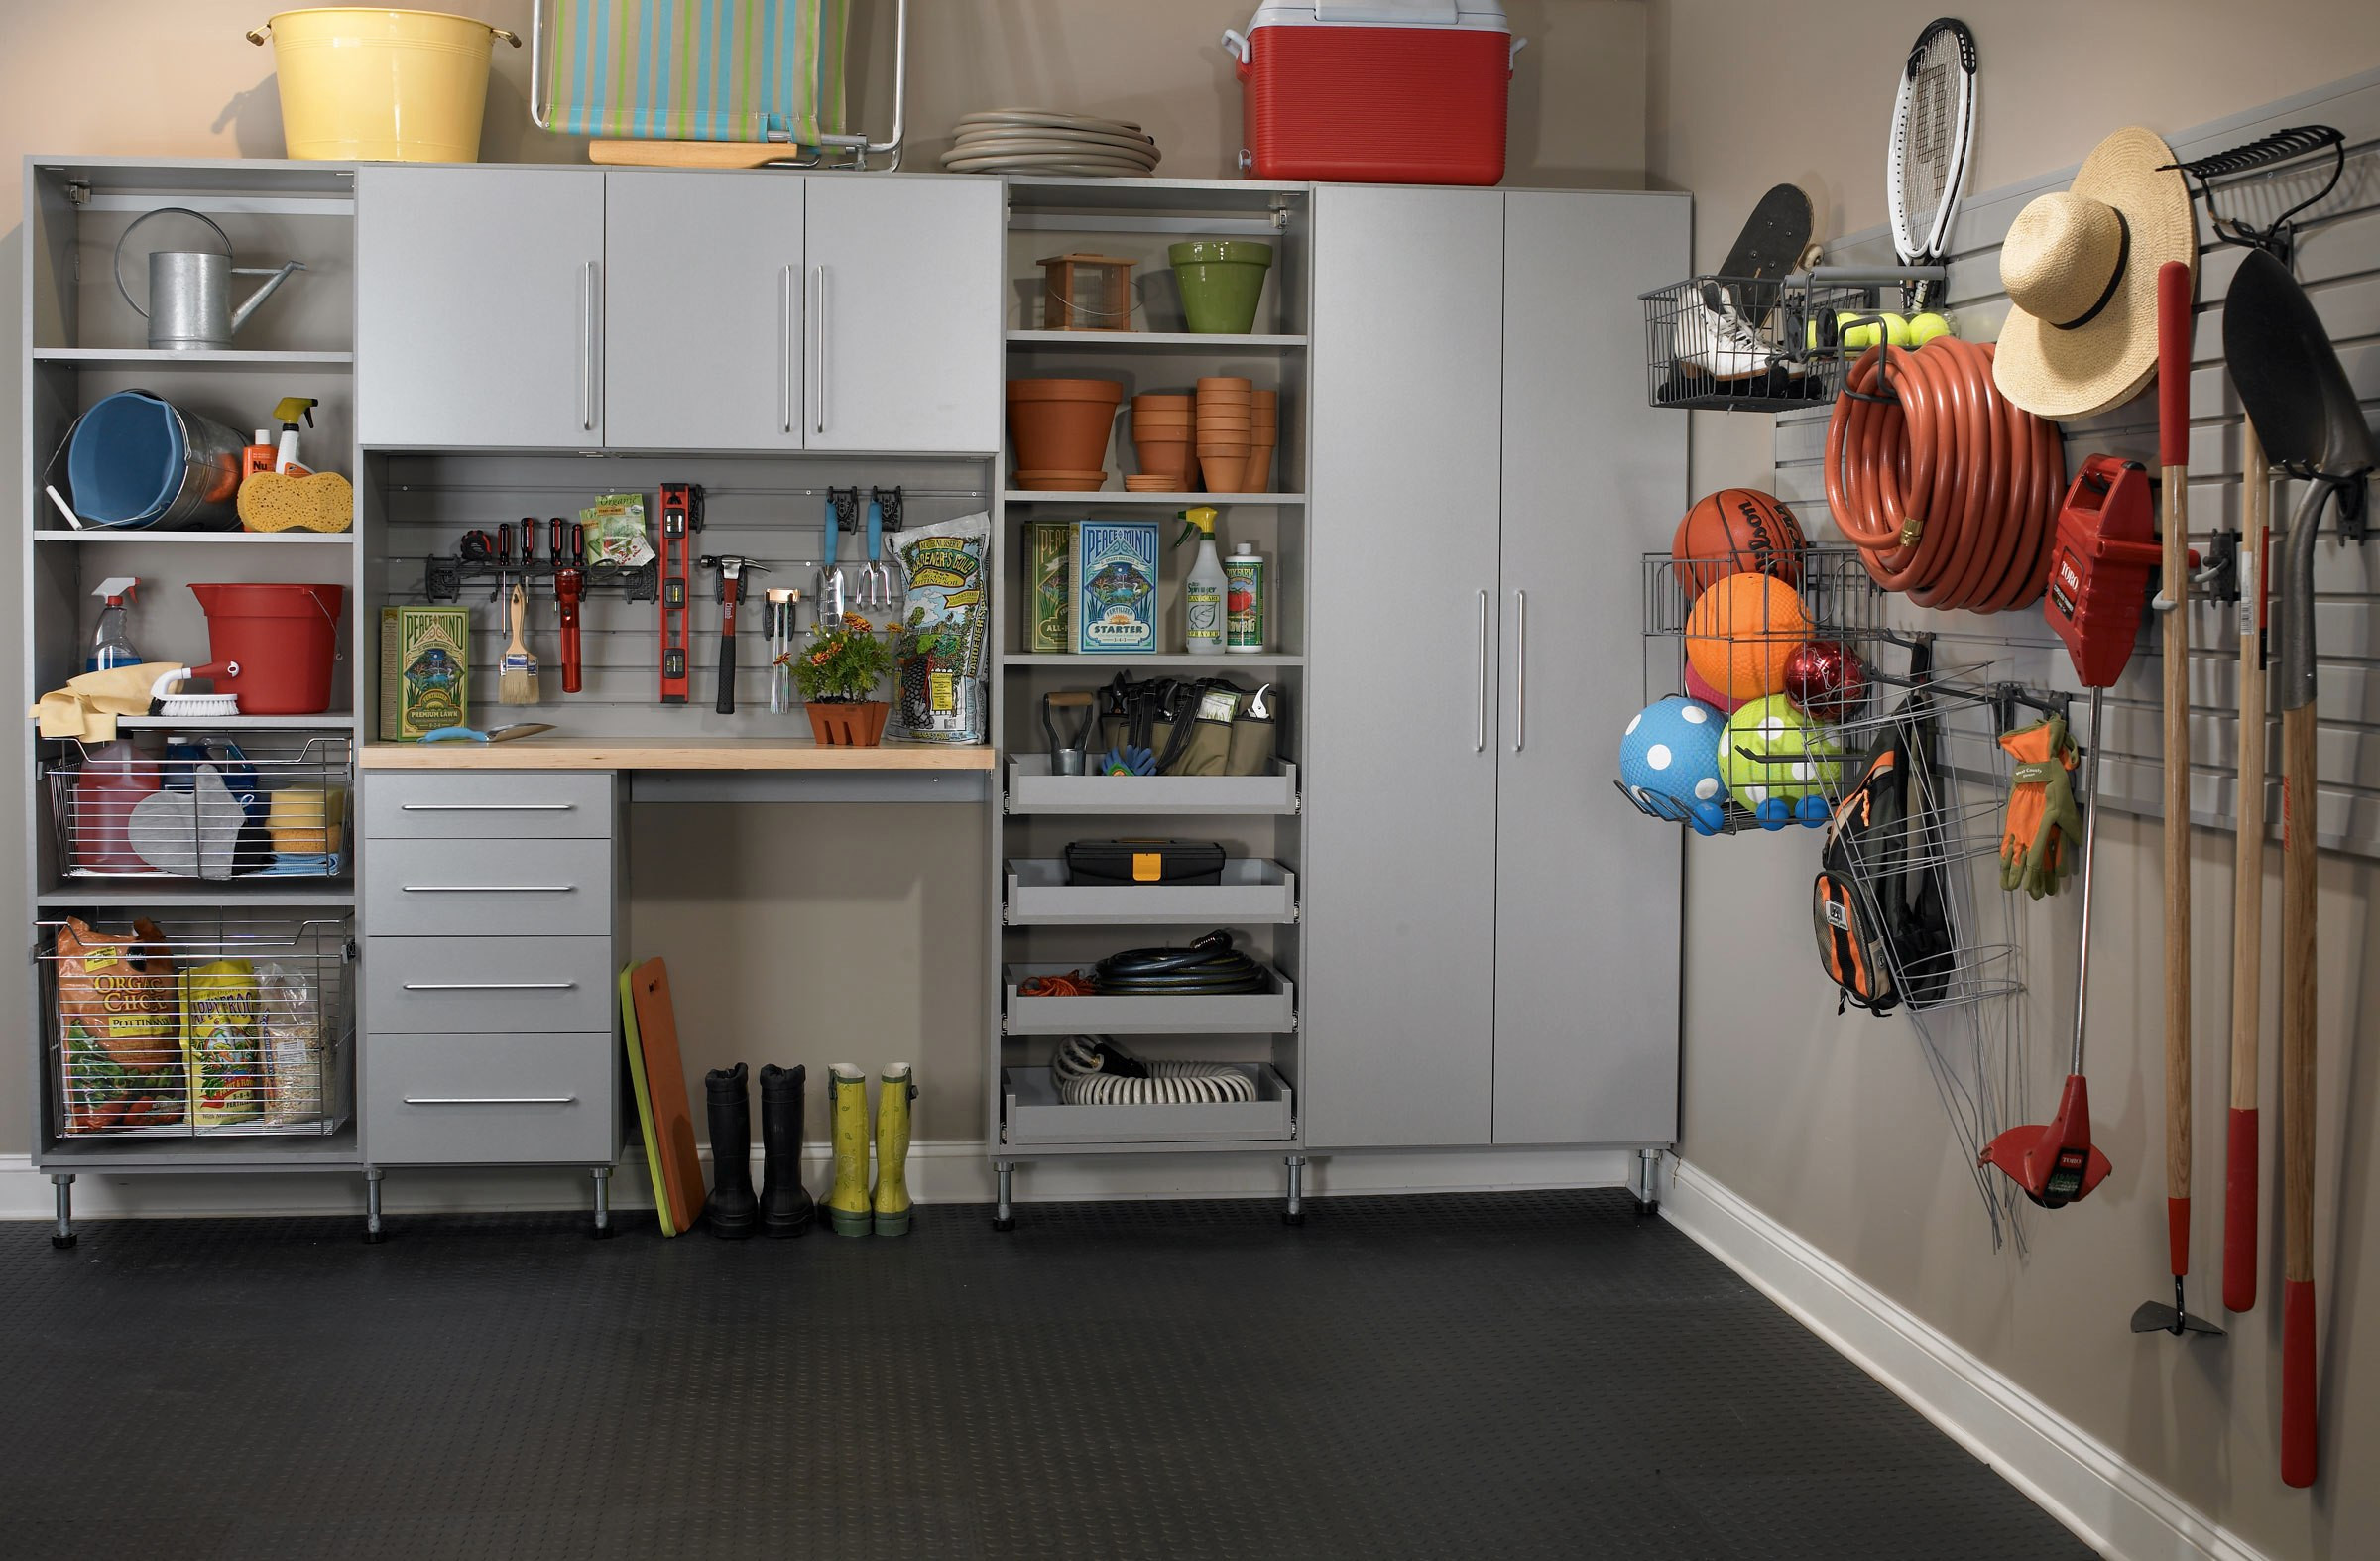 Organizing Your Garage
 Organize Your Garage with a Fool Proof 5 Step Plan